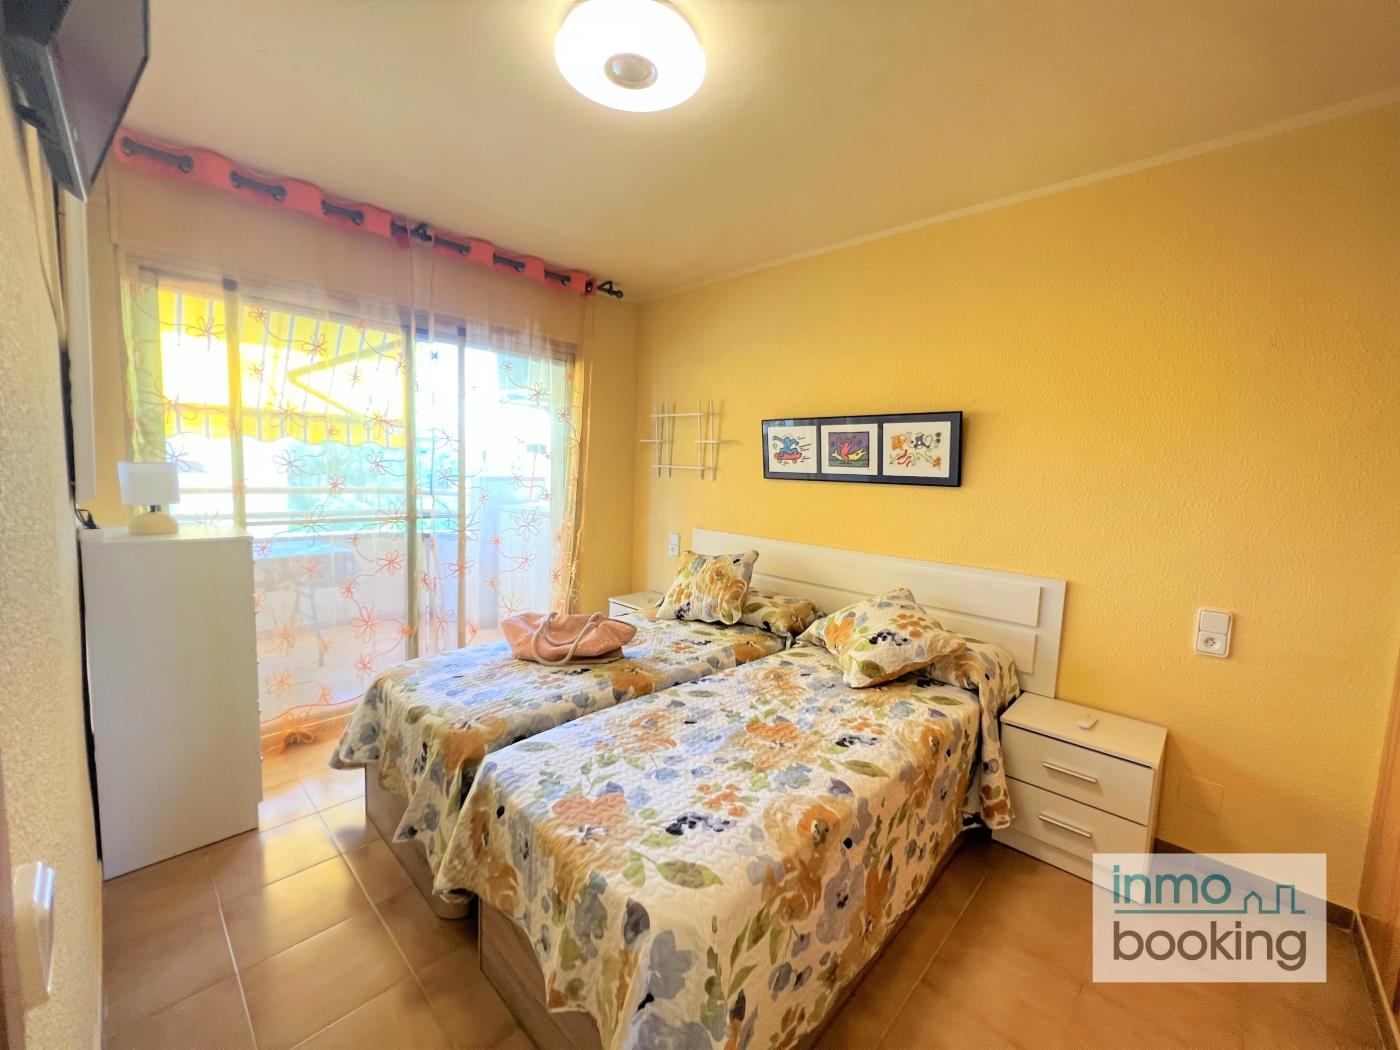 Cordoba Apartments, heated, pool and close to the beach. in salou